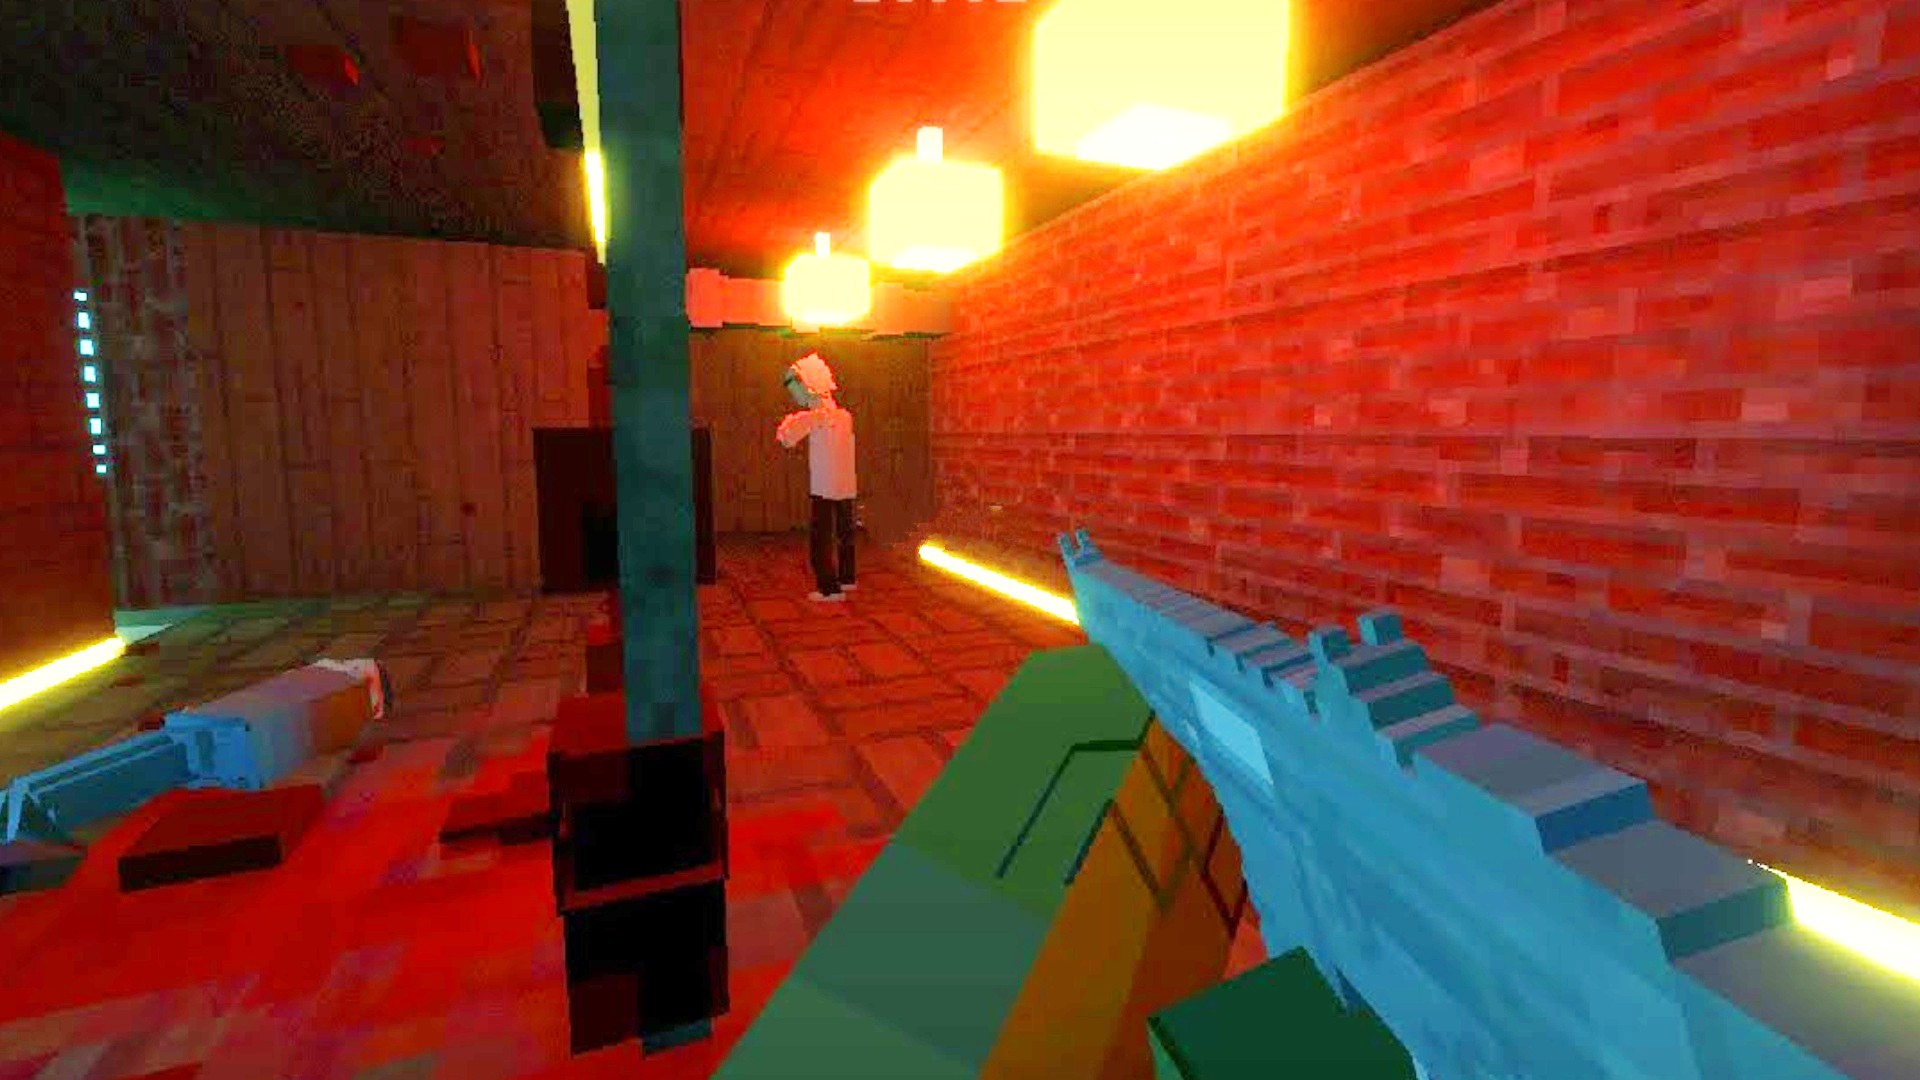 Hotline Miami reimagined as a new, super destructive FPS game you can try right now